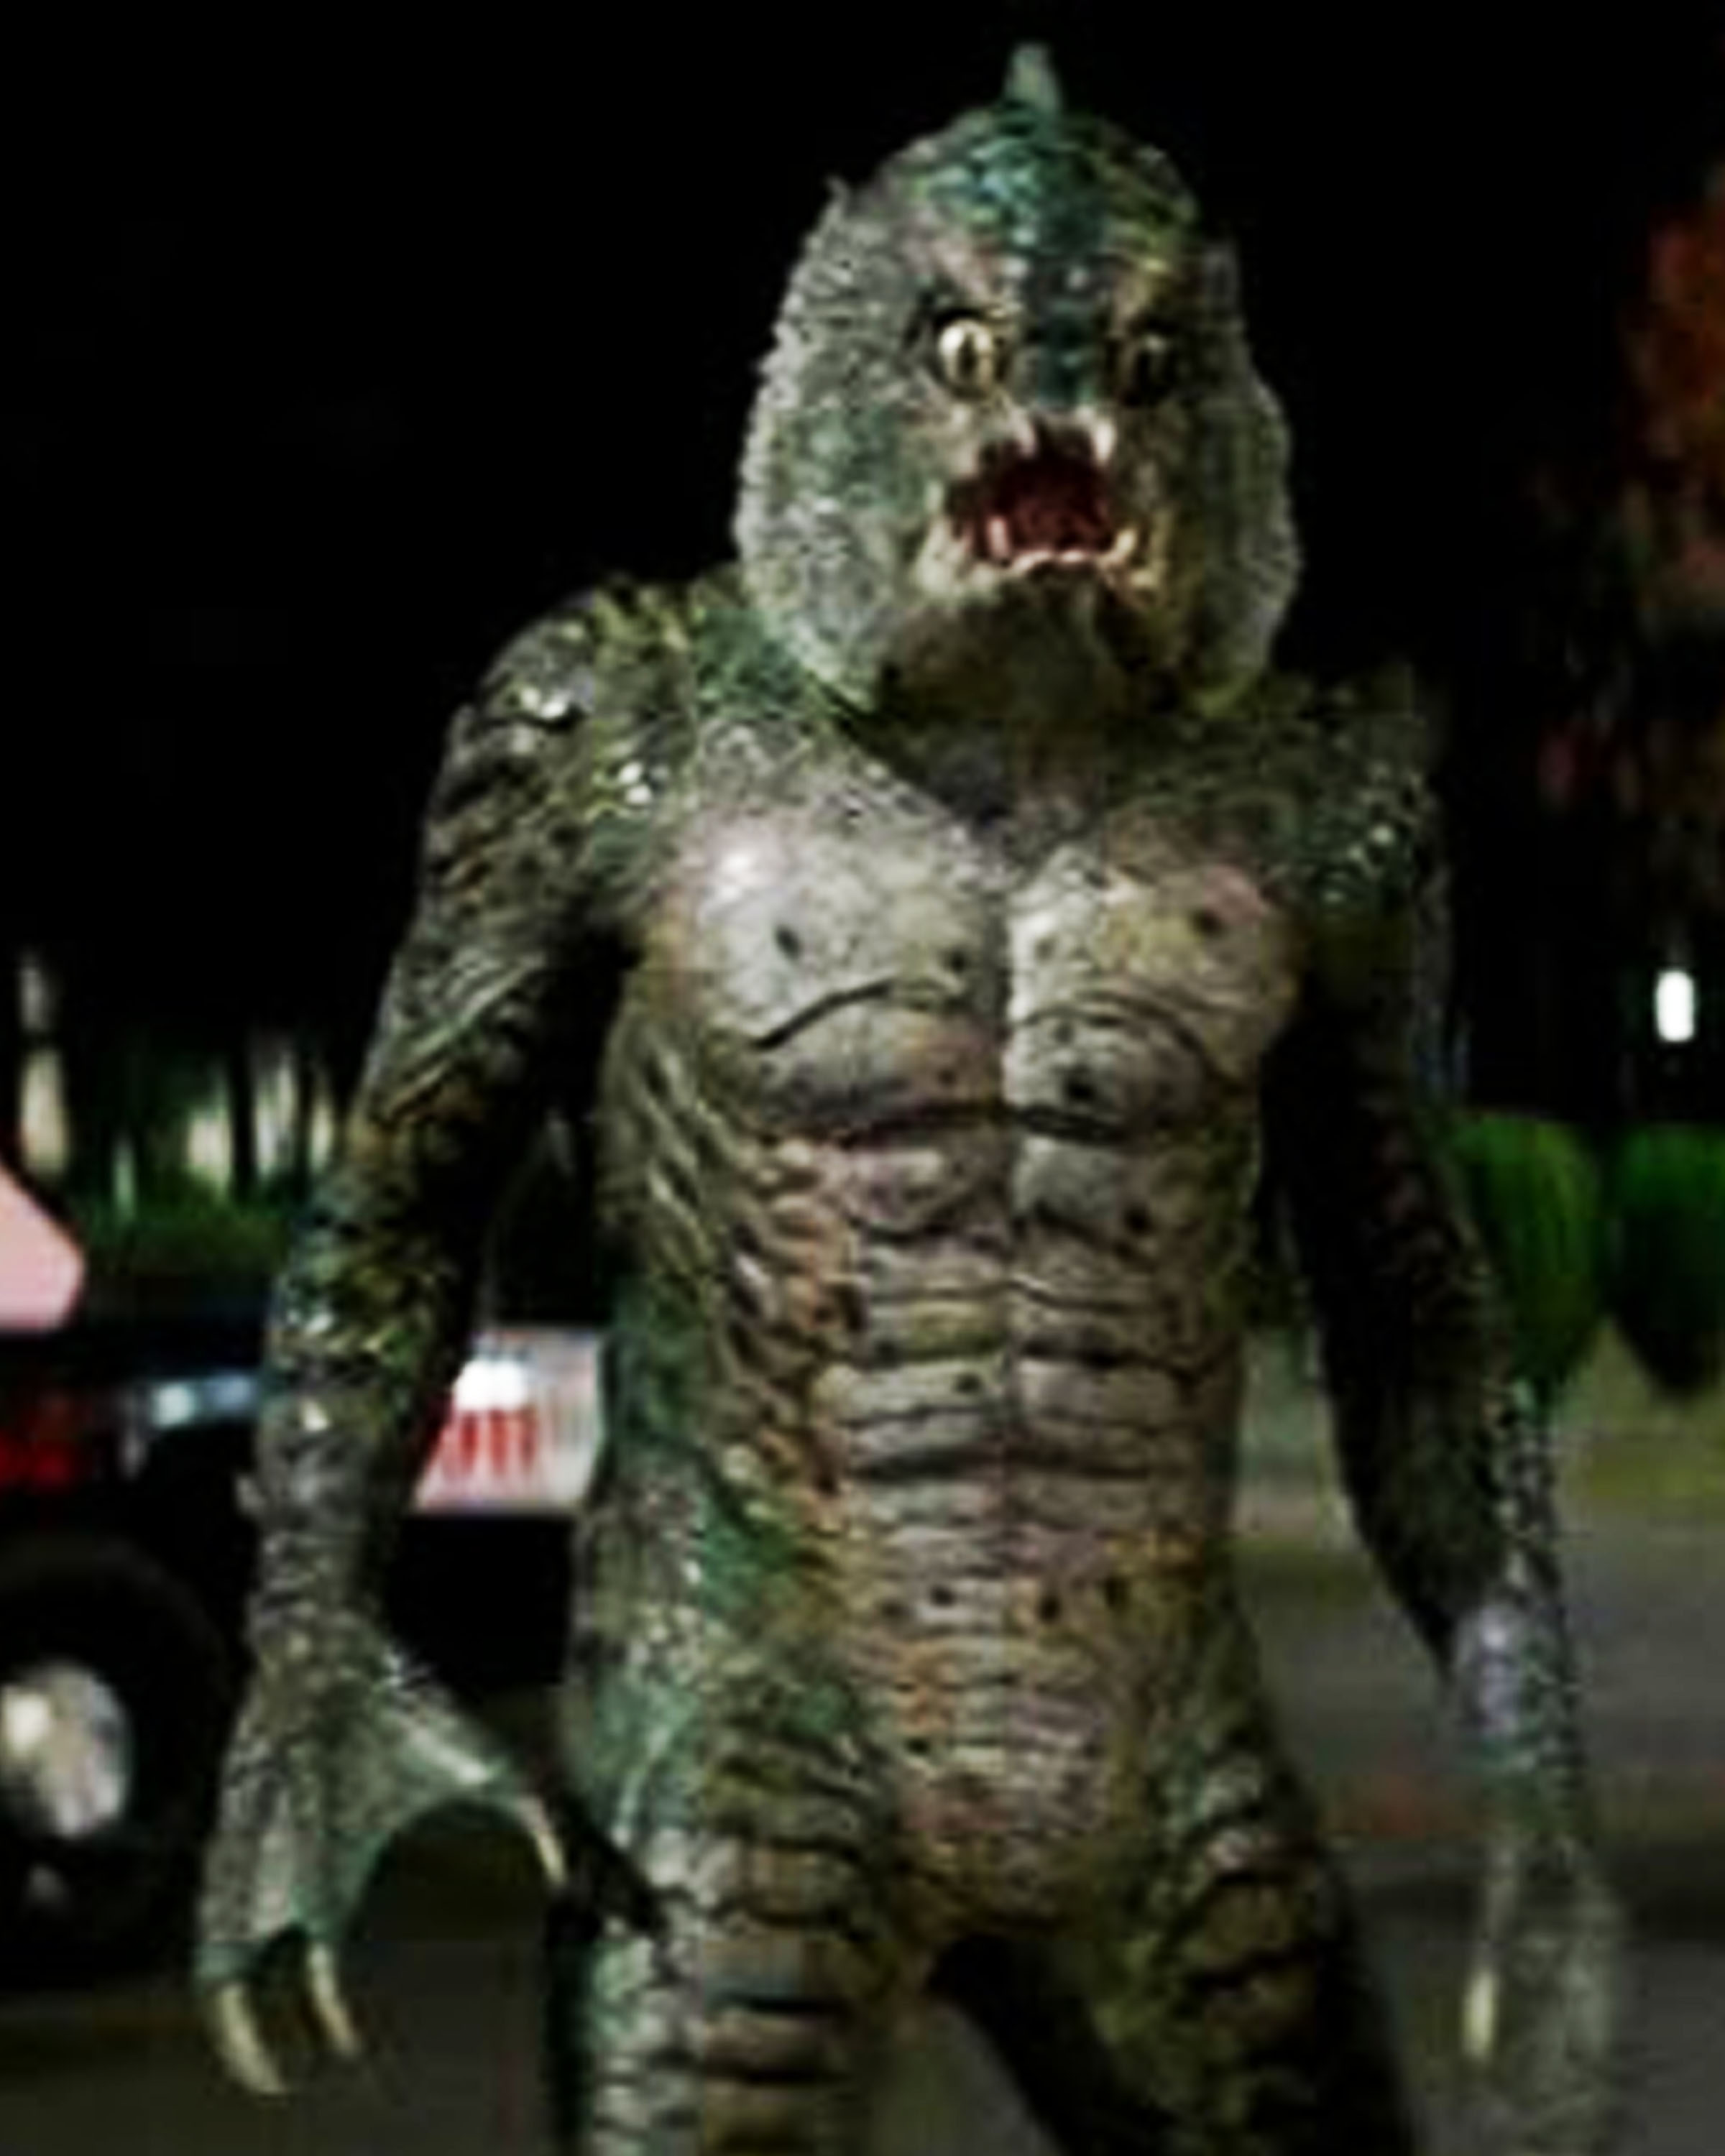 As the Gillman in The Monster Squad